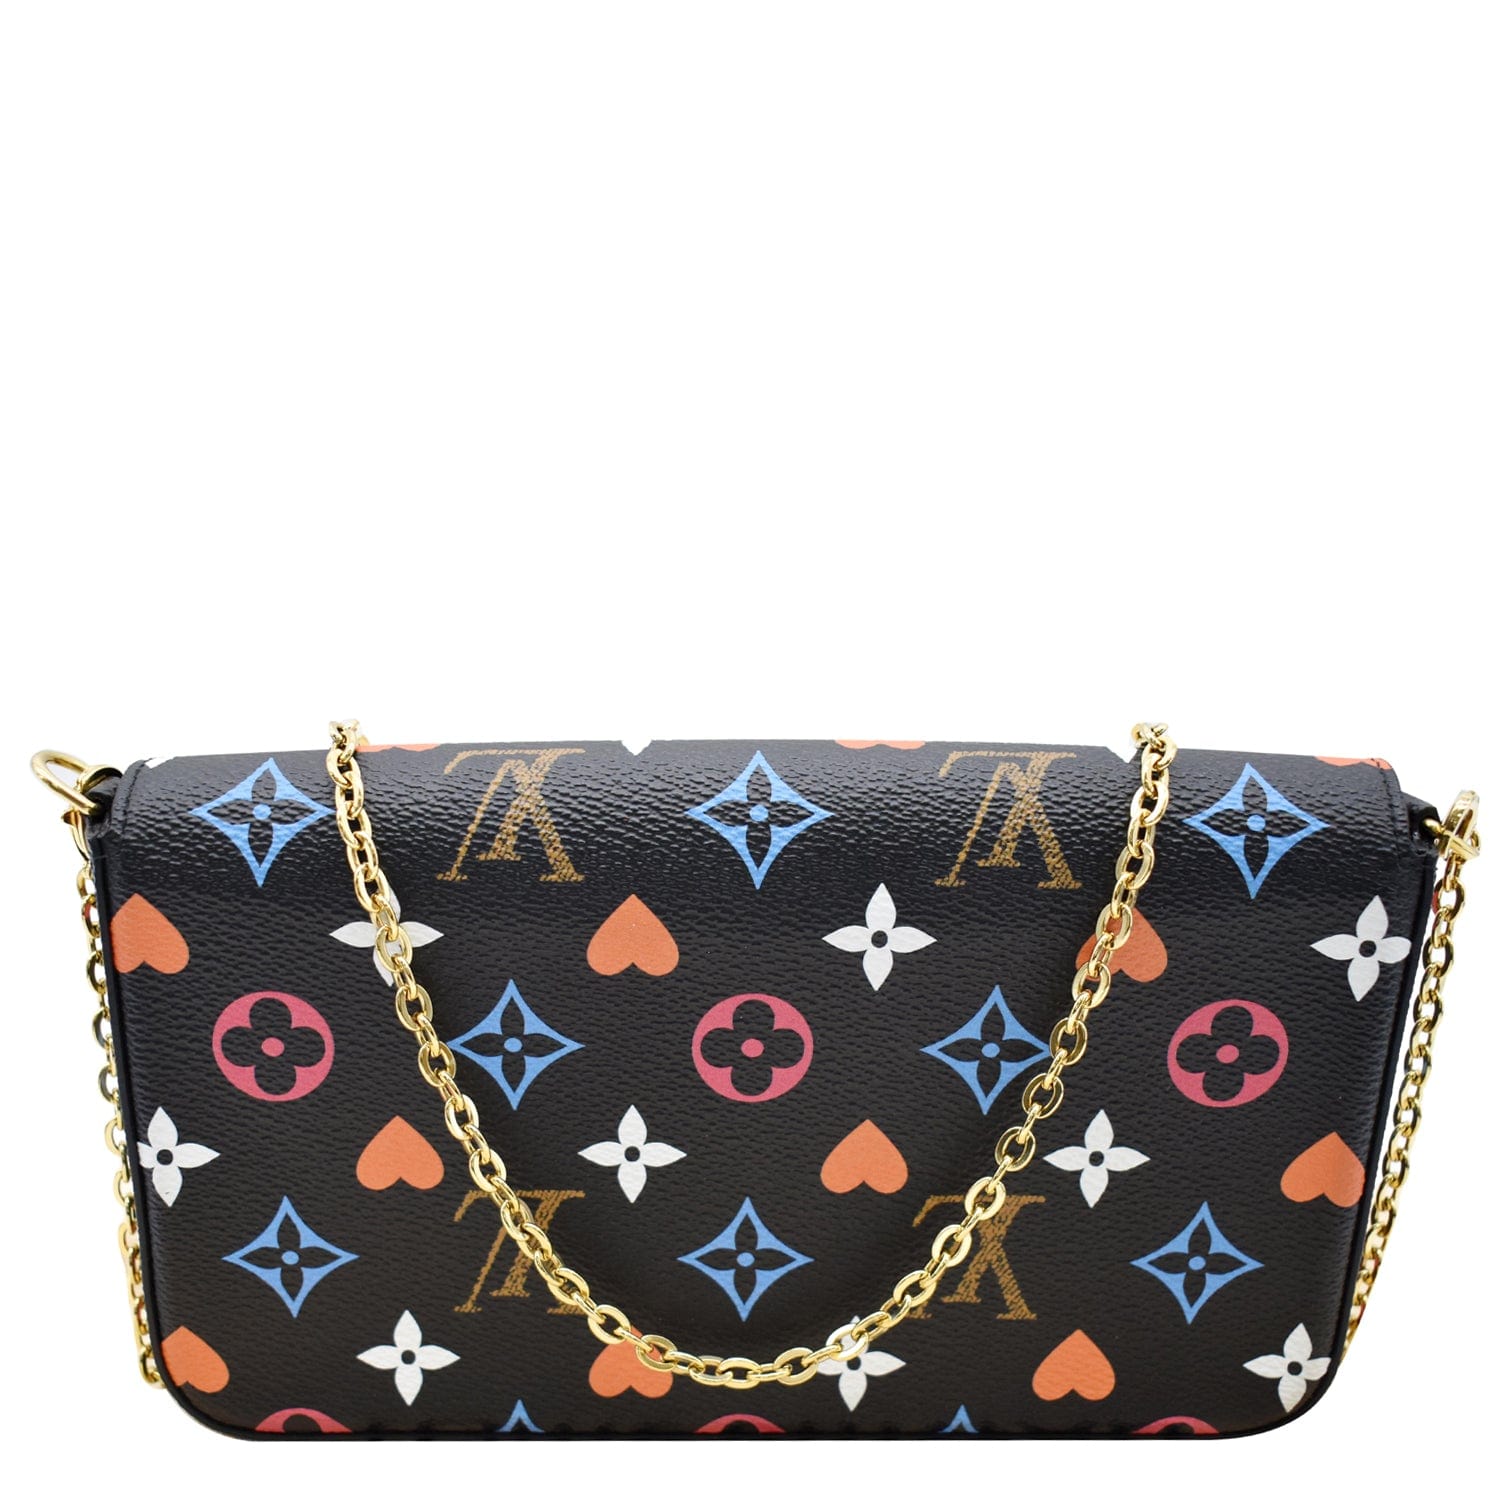 New Louis Vuitton Cards Limited Edition Black Felicie Bag at